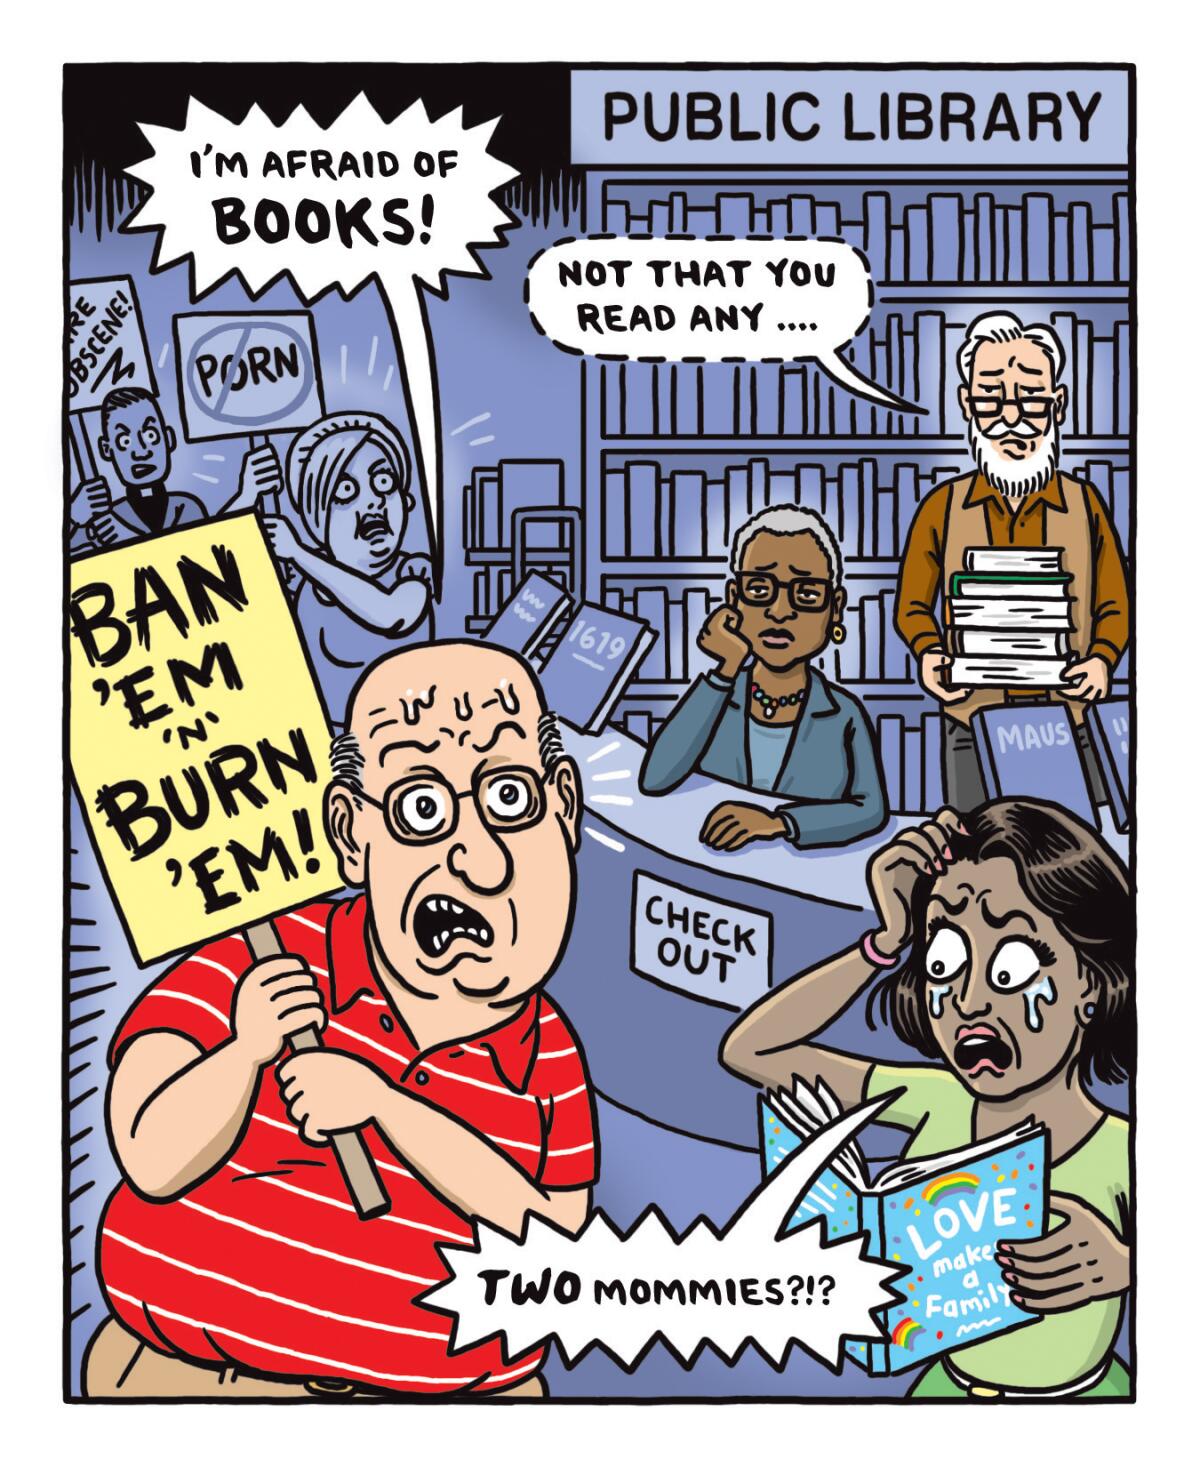 Illustration of people freaking out in a library, advocating banning books, while librarians calmly look on